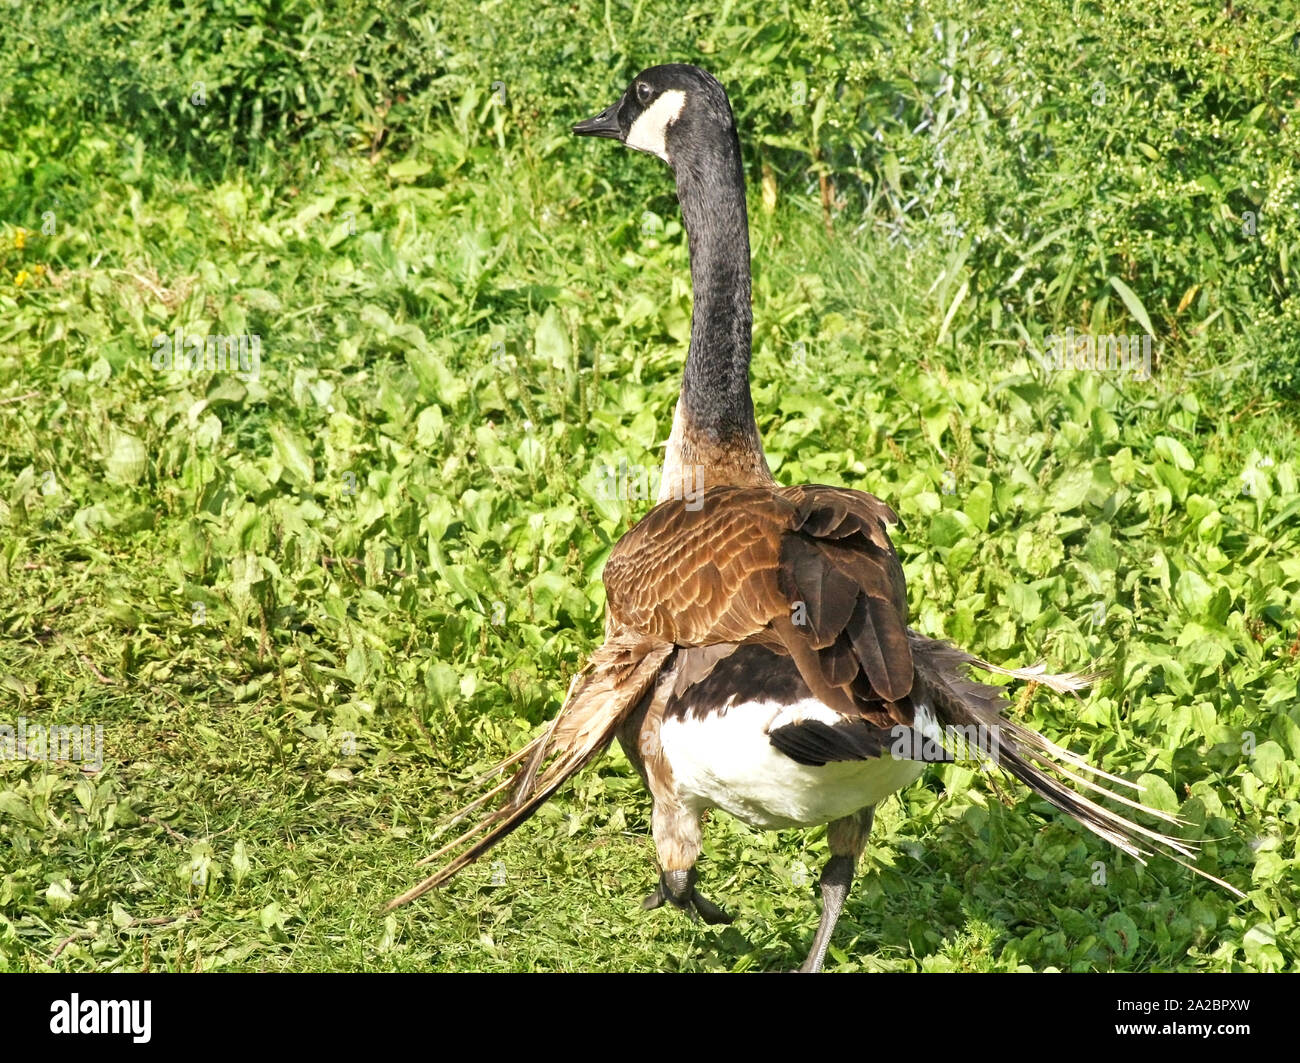 Canada goose walking along grassy area with injured wings Stock Photo